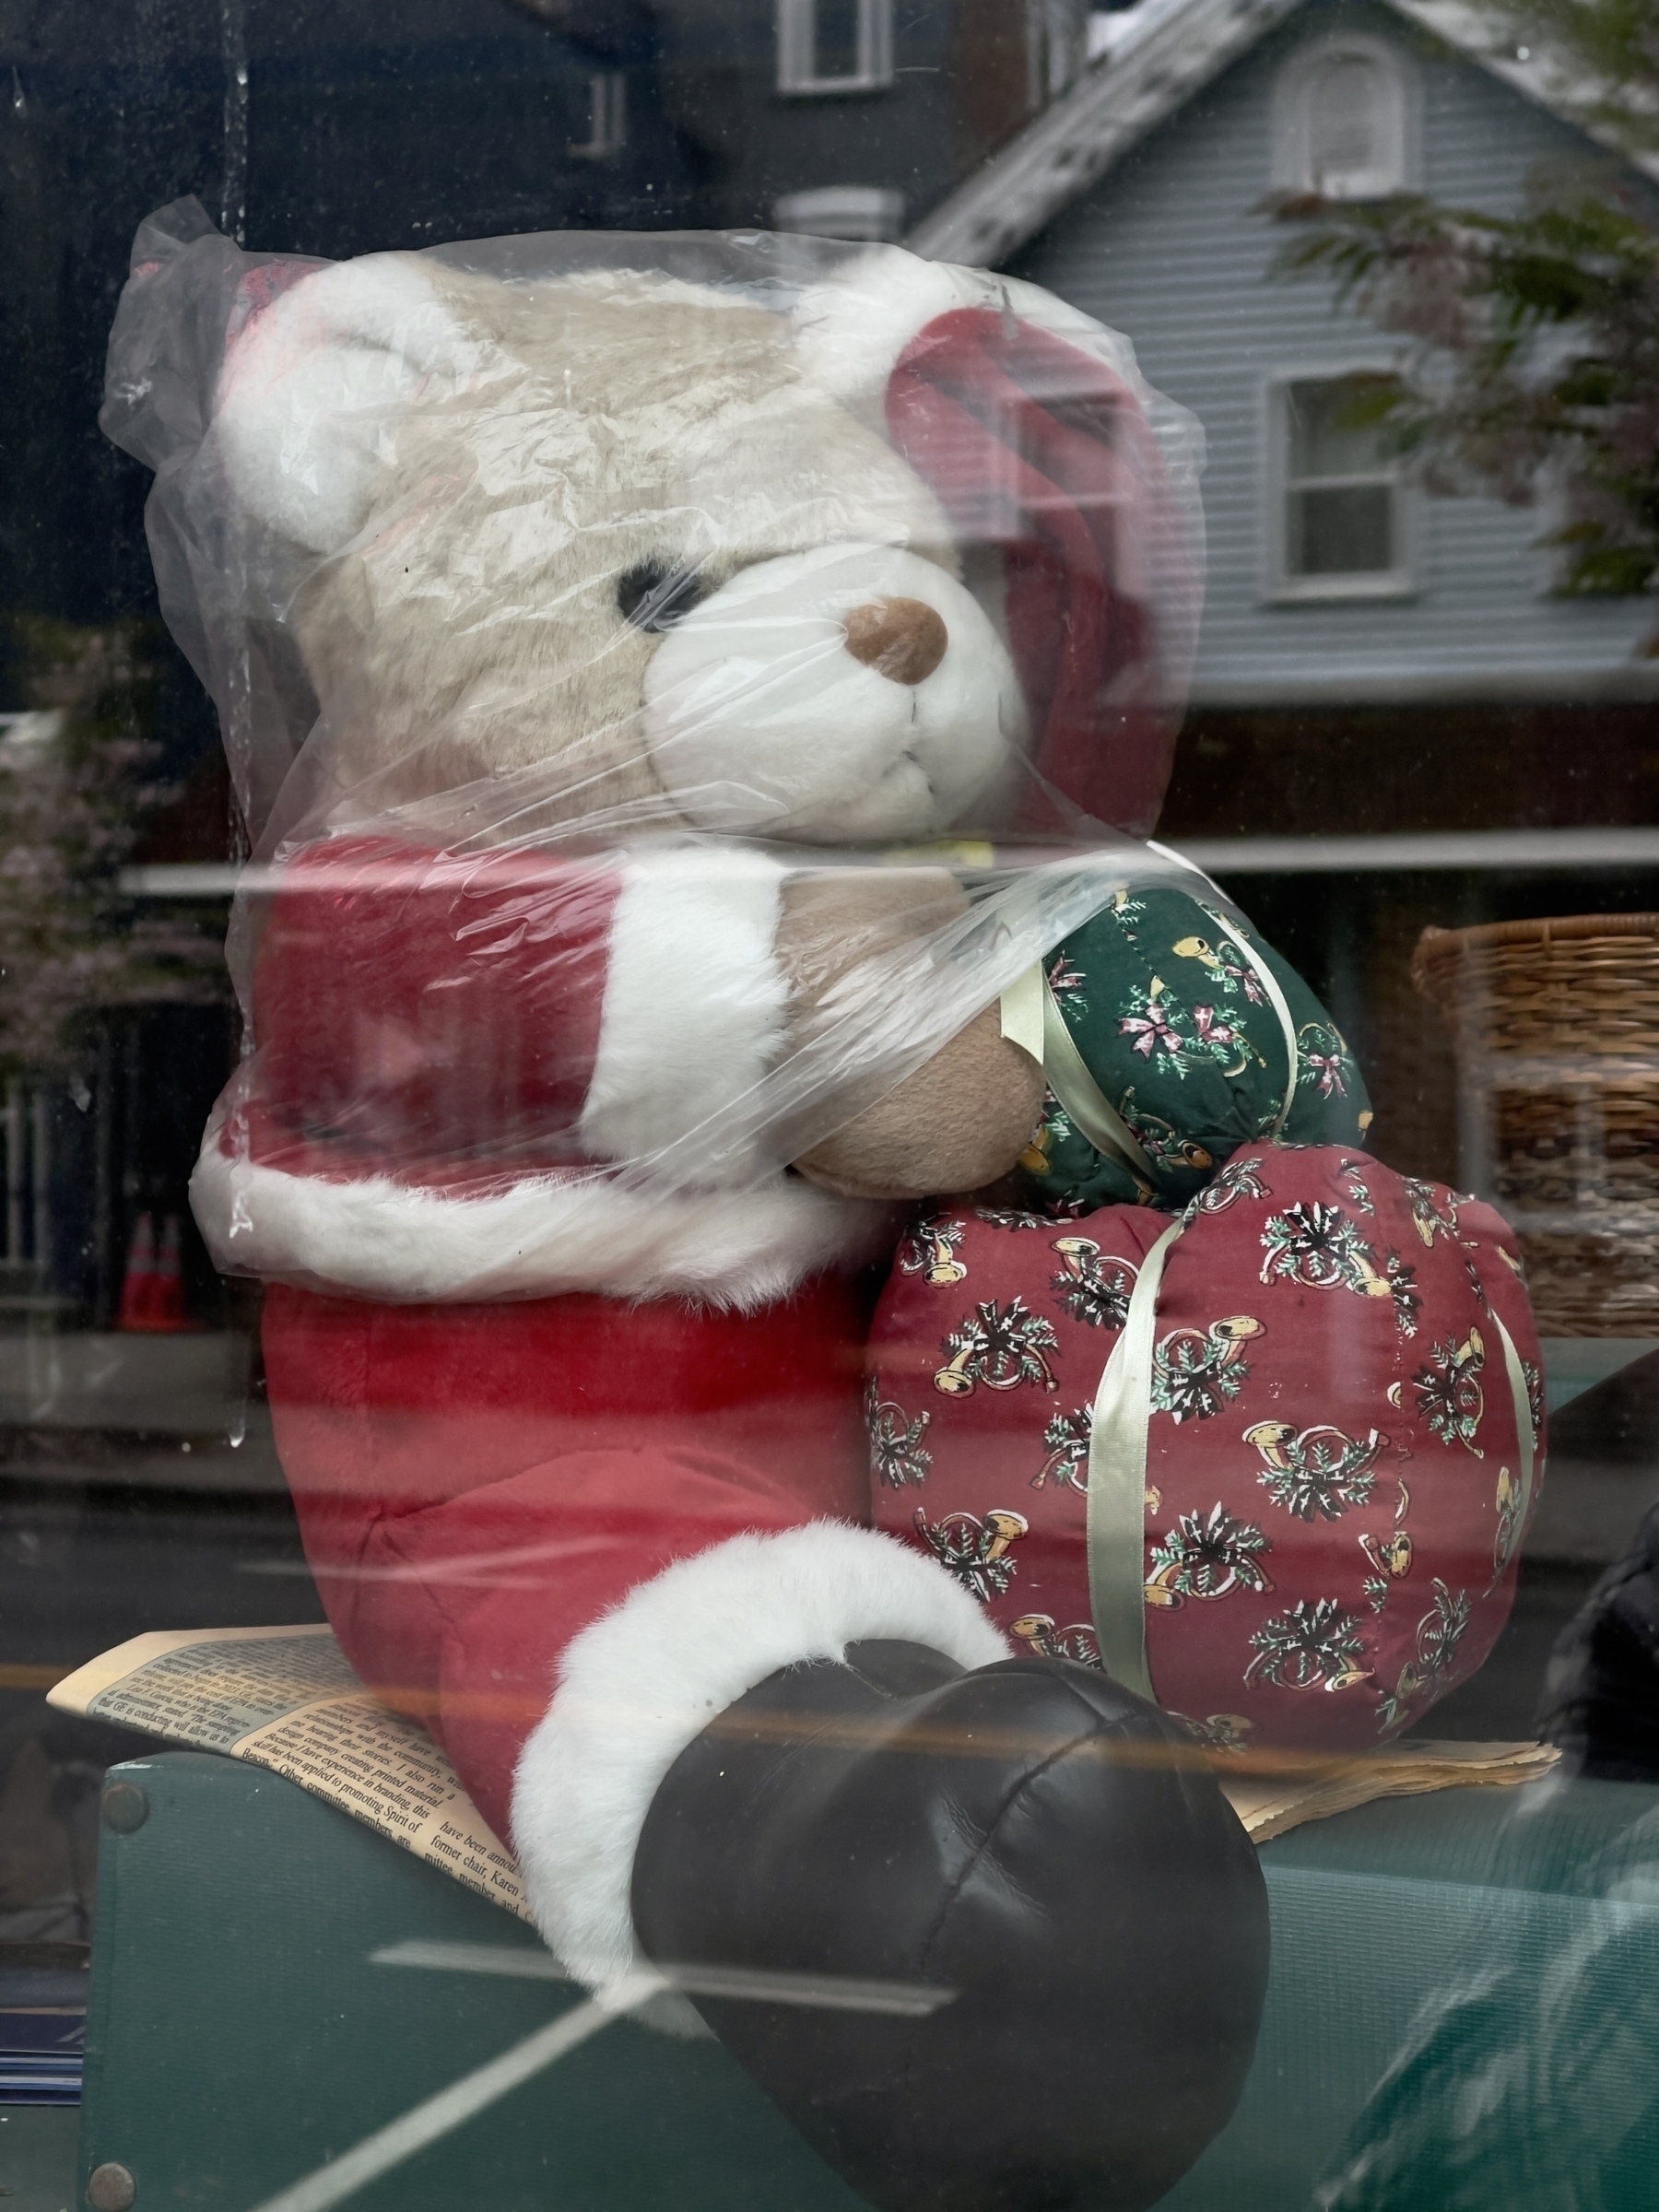 Christmas teddy bear with plastic bag over its head in the window of a florest shop. Something a little disturbing to me about it. Color.